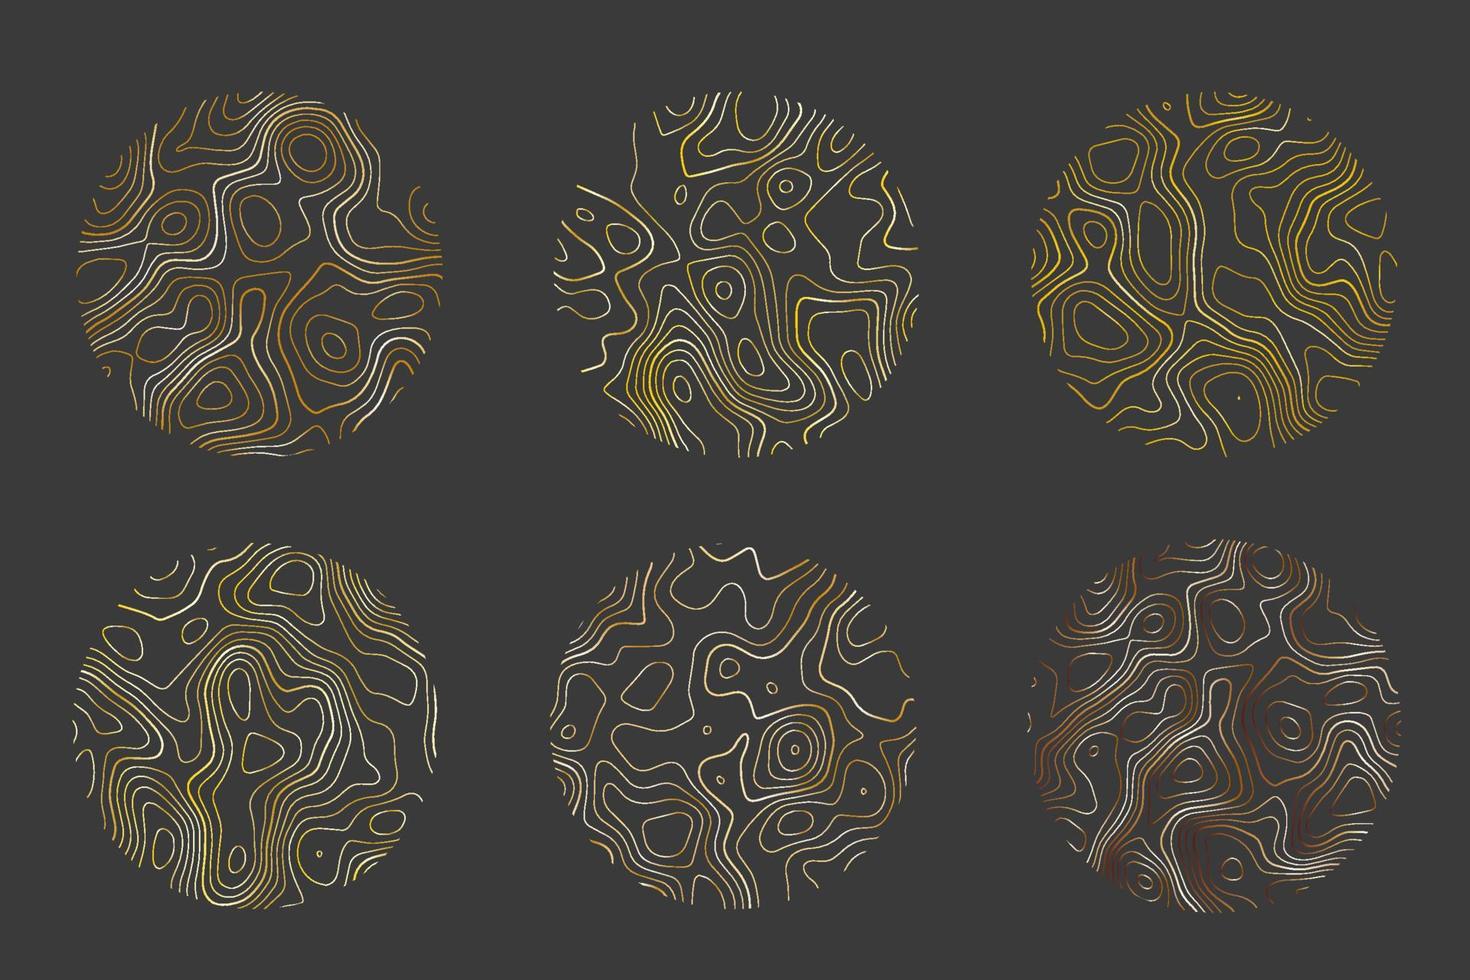 Wood texture with topography lines. Organic ripple wavy patterns. Tree rings set. Vector doodle illustration with metal gradient.